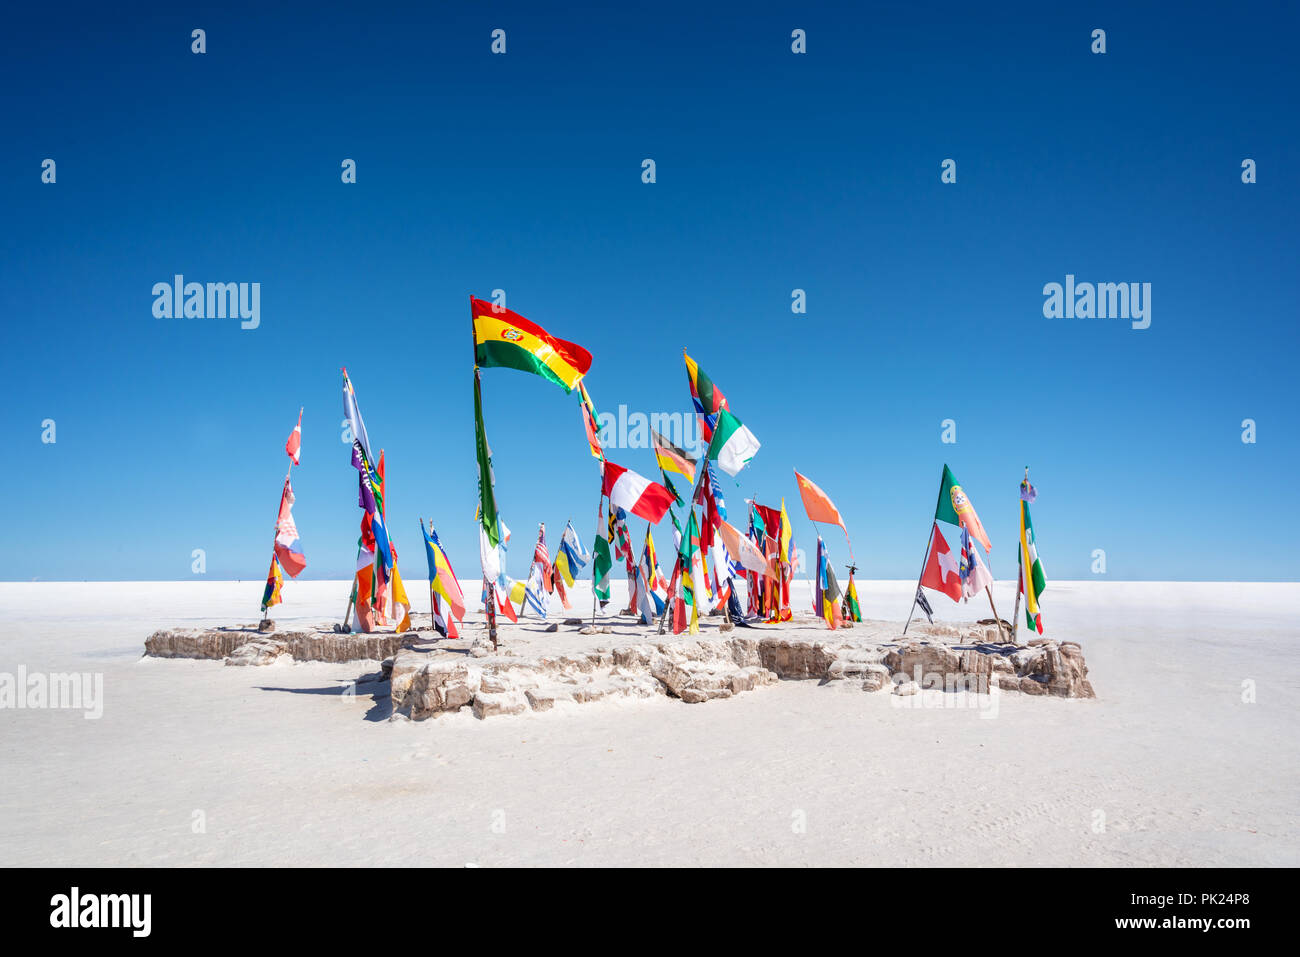 Colorful Flags From All Over the World at Uyuni Salt Flats, Bolivia, South America Stock Photo